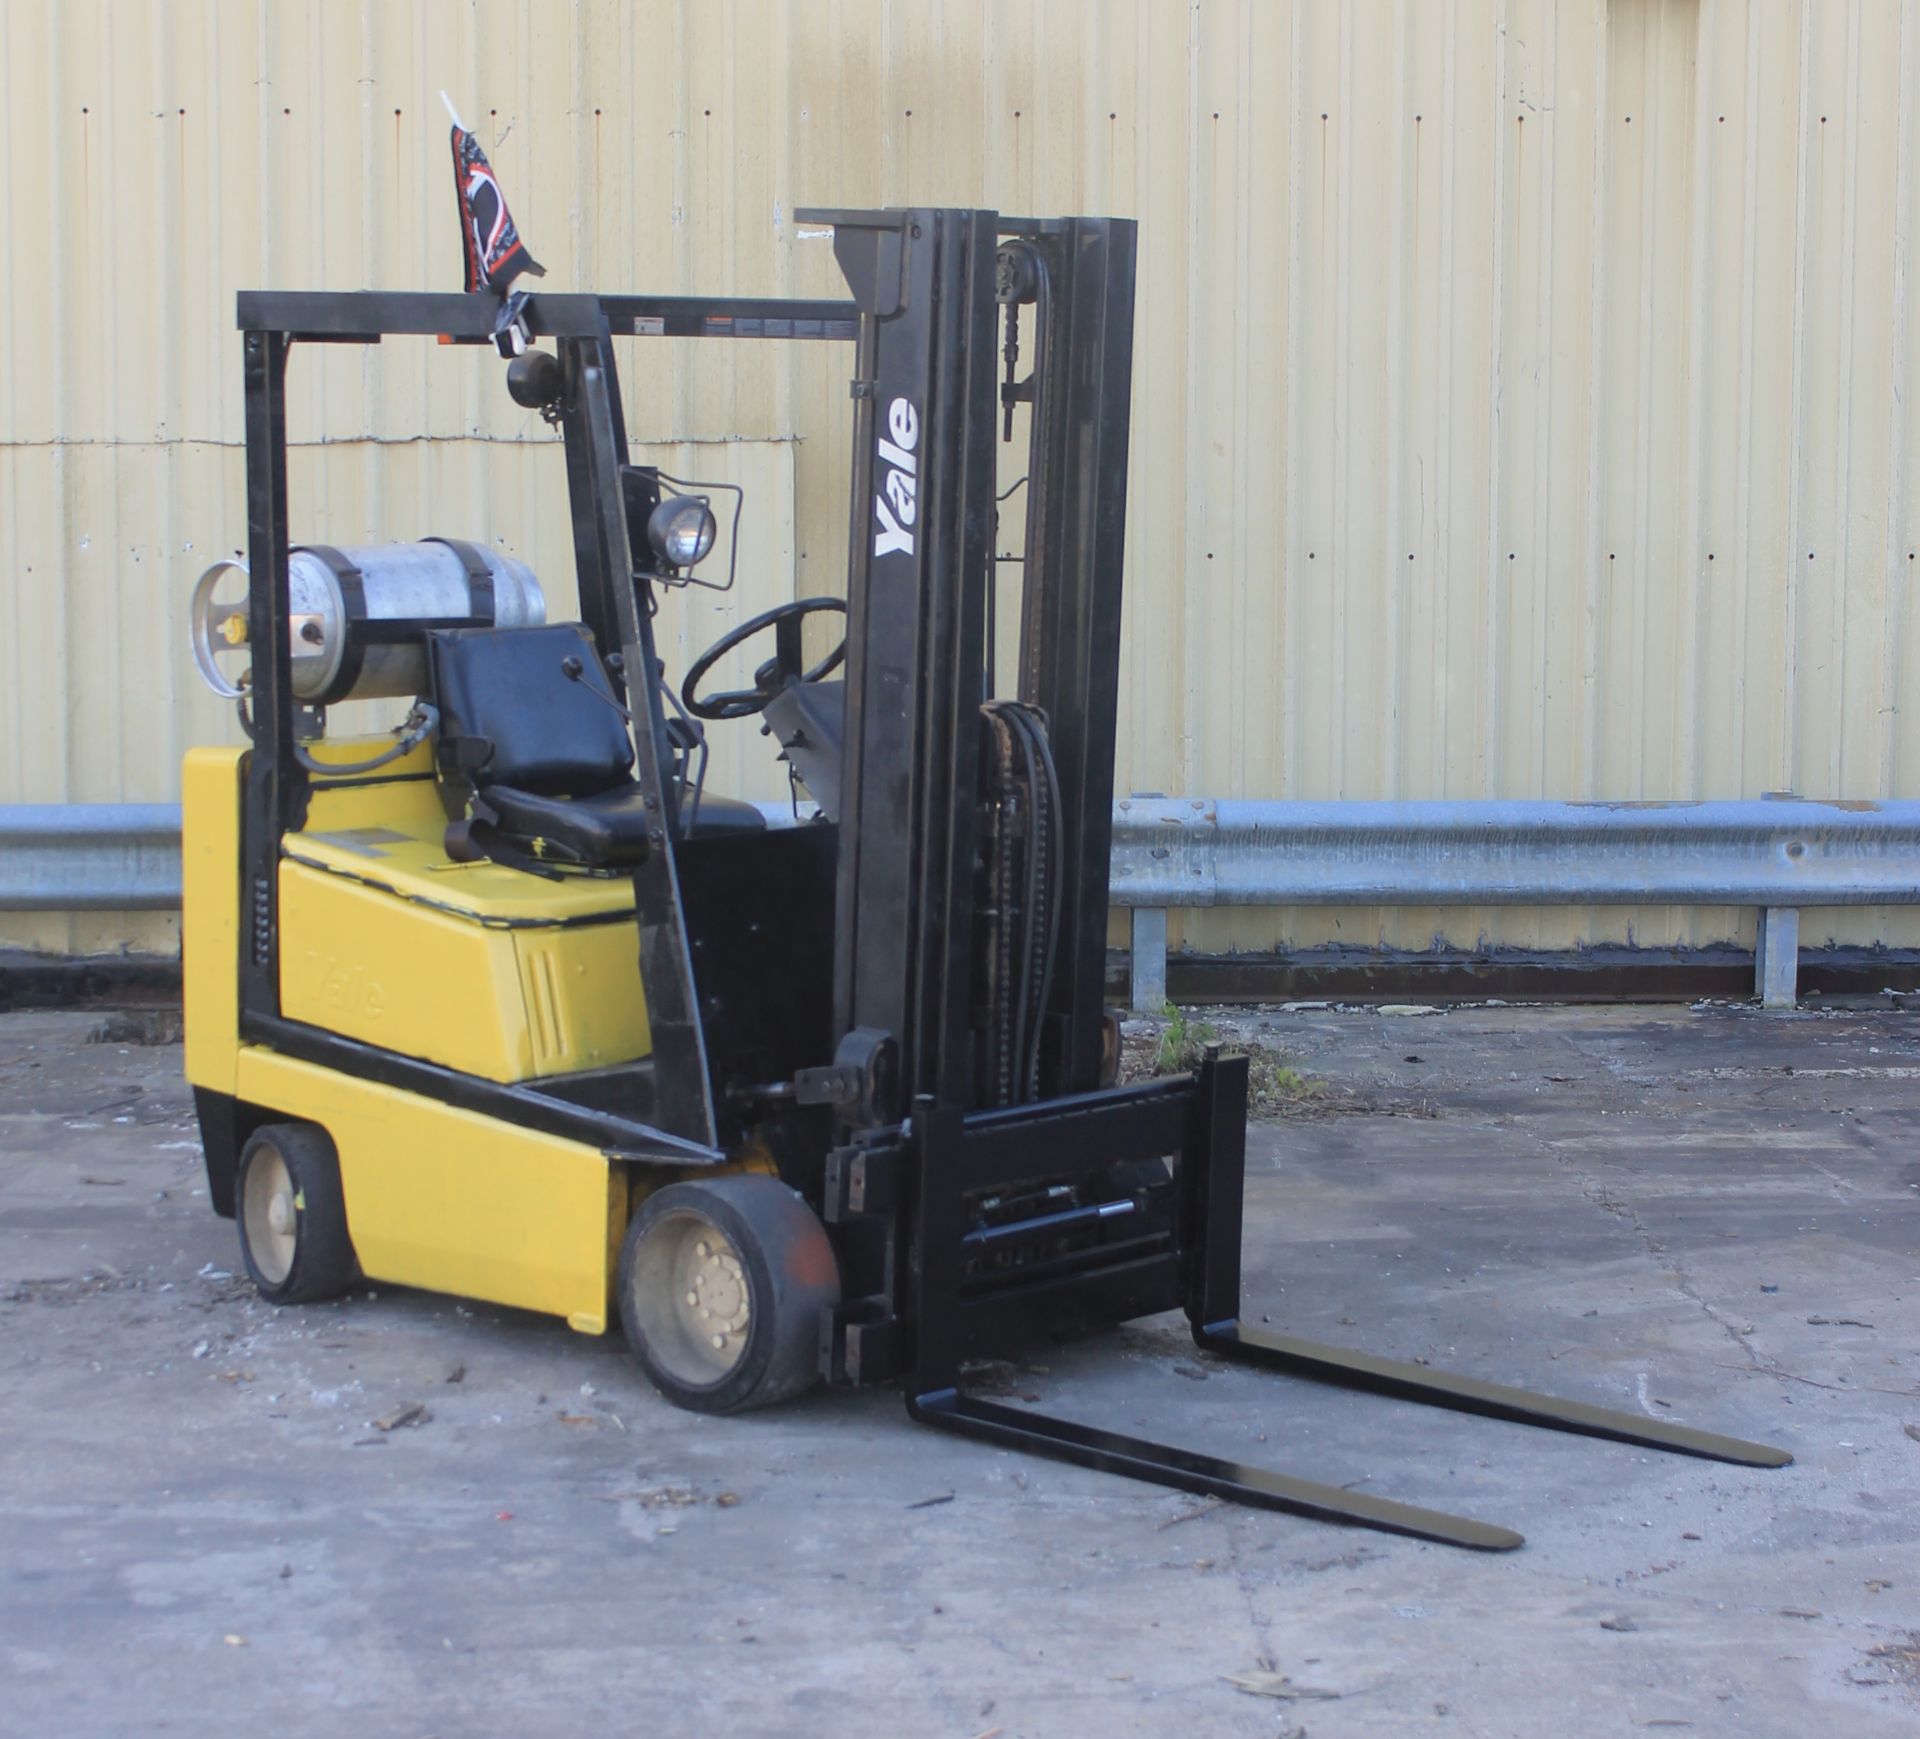 1991 YALE PROPANE FORKLIFT 4000 CAPACITY, 6340 HRS (WATCH VIDEO)